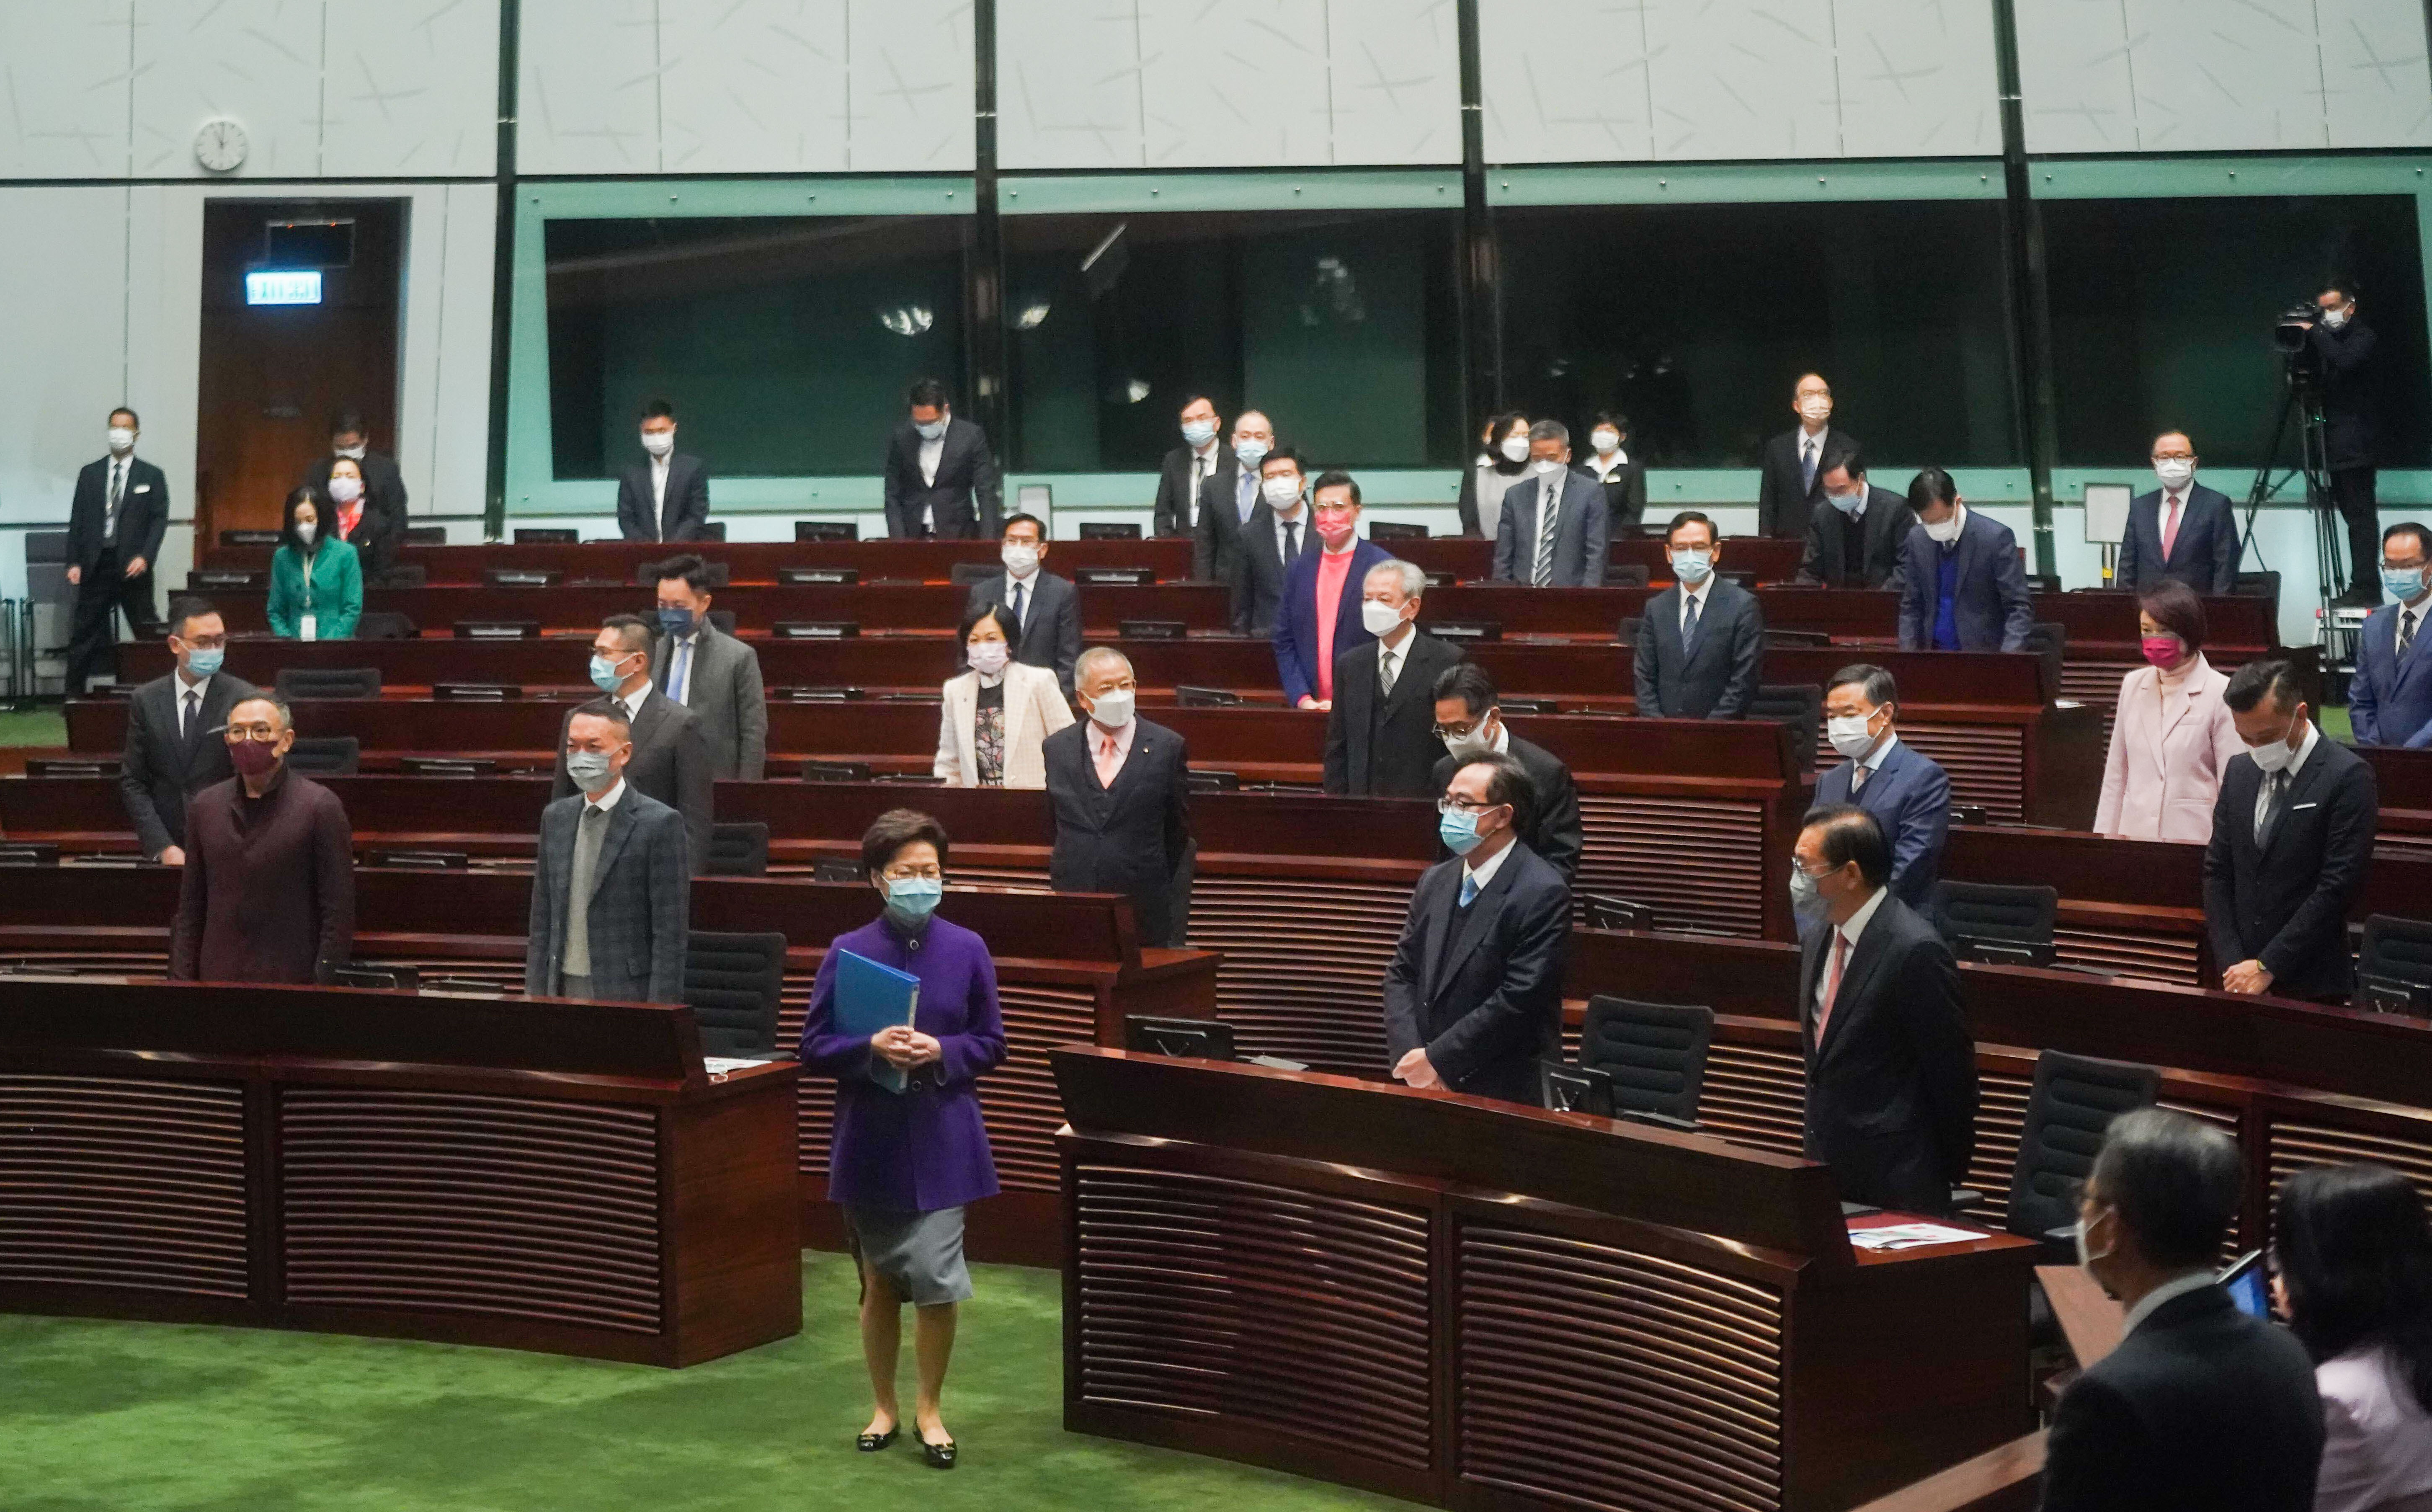 Carrie Lam enters the chamber to open the new Legco term. Photo: Sam Tsang